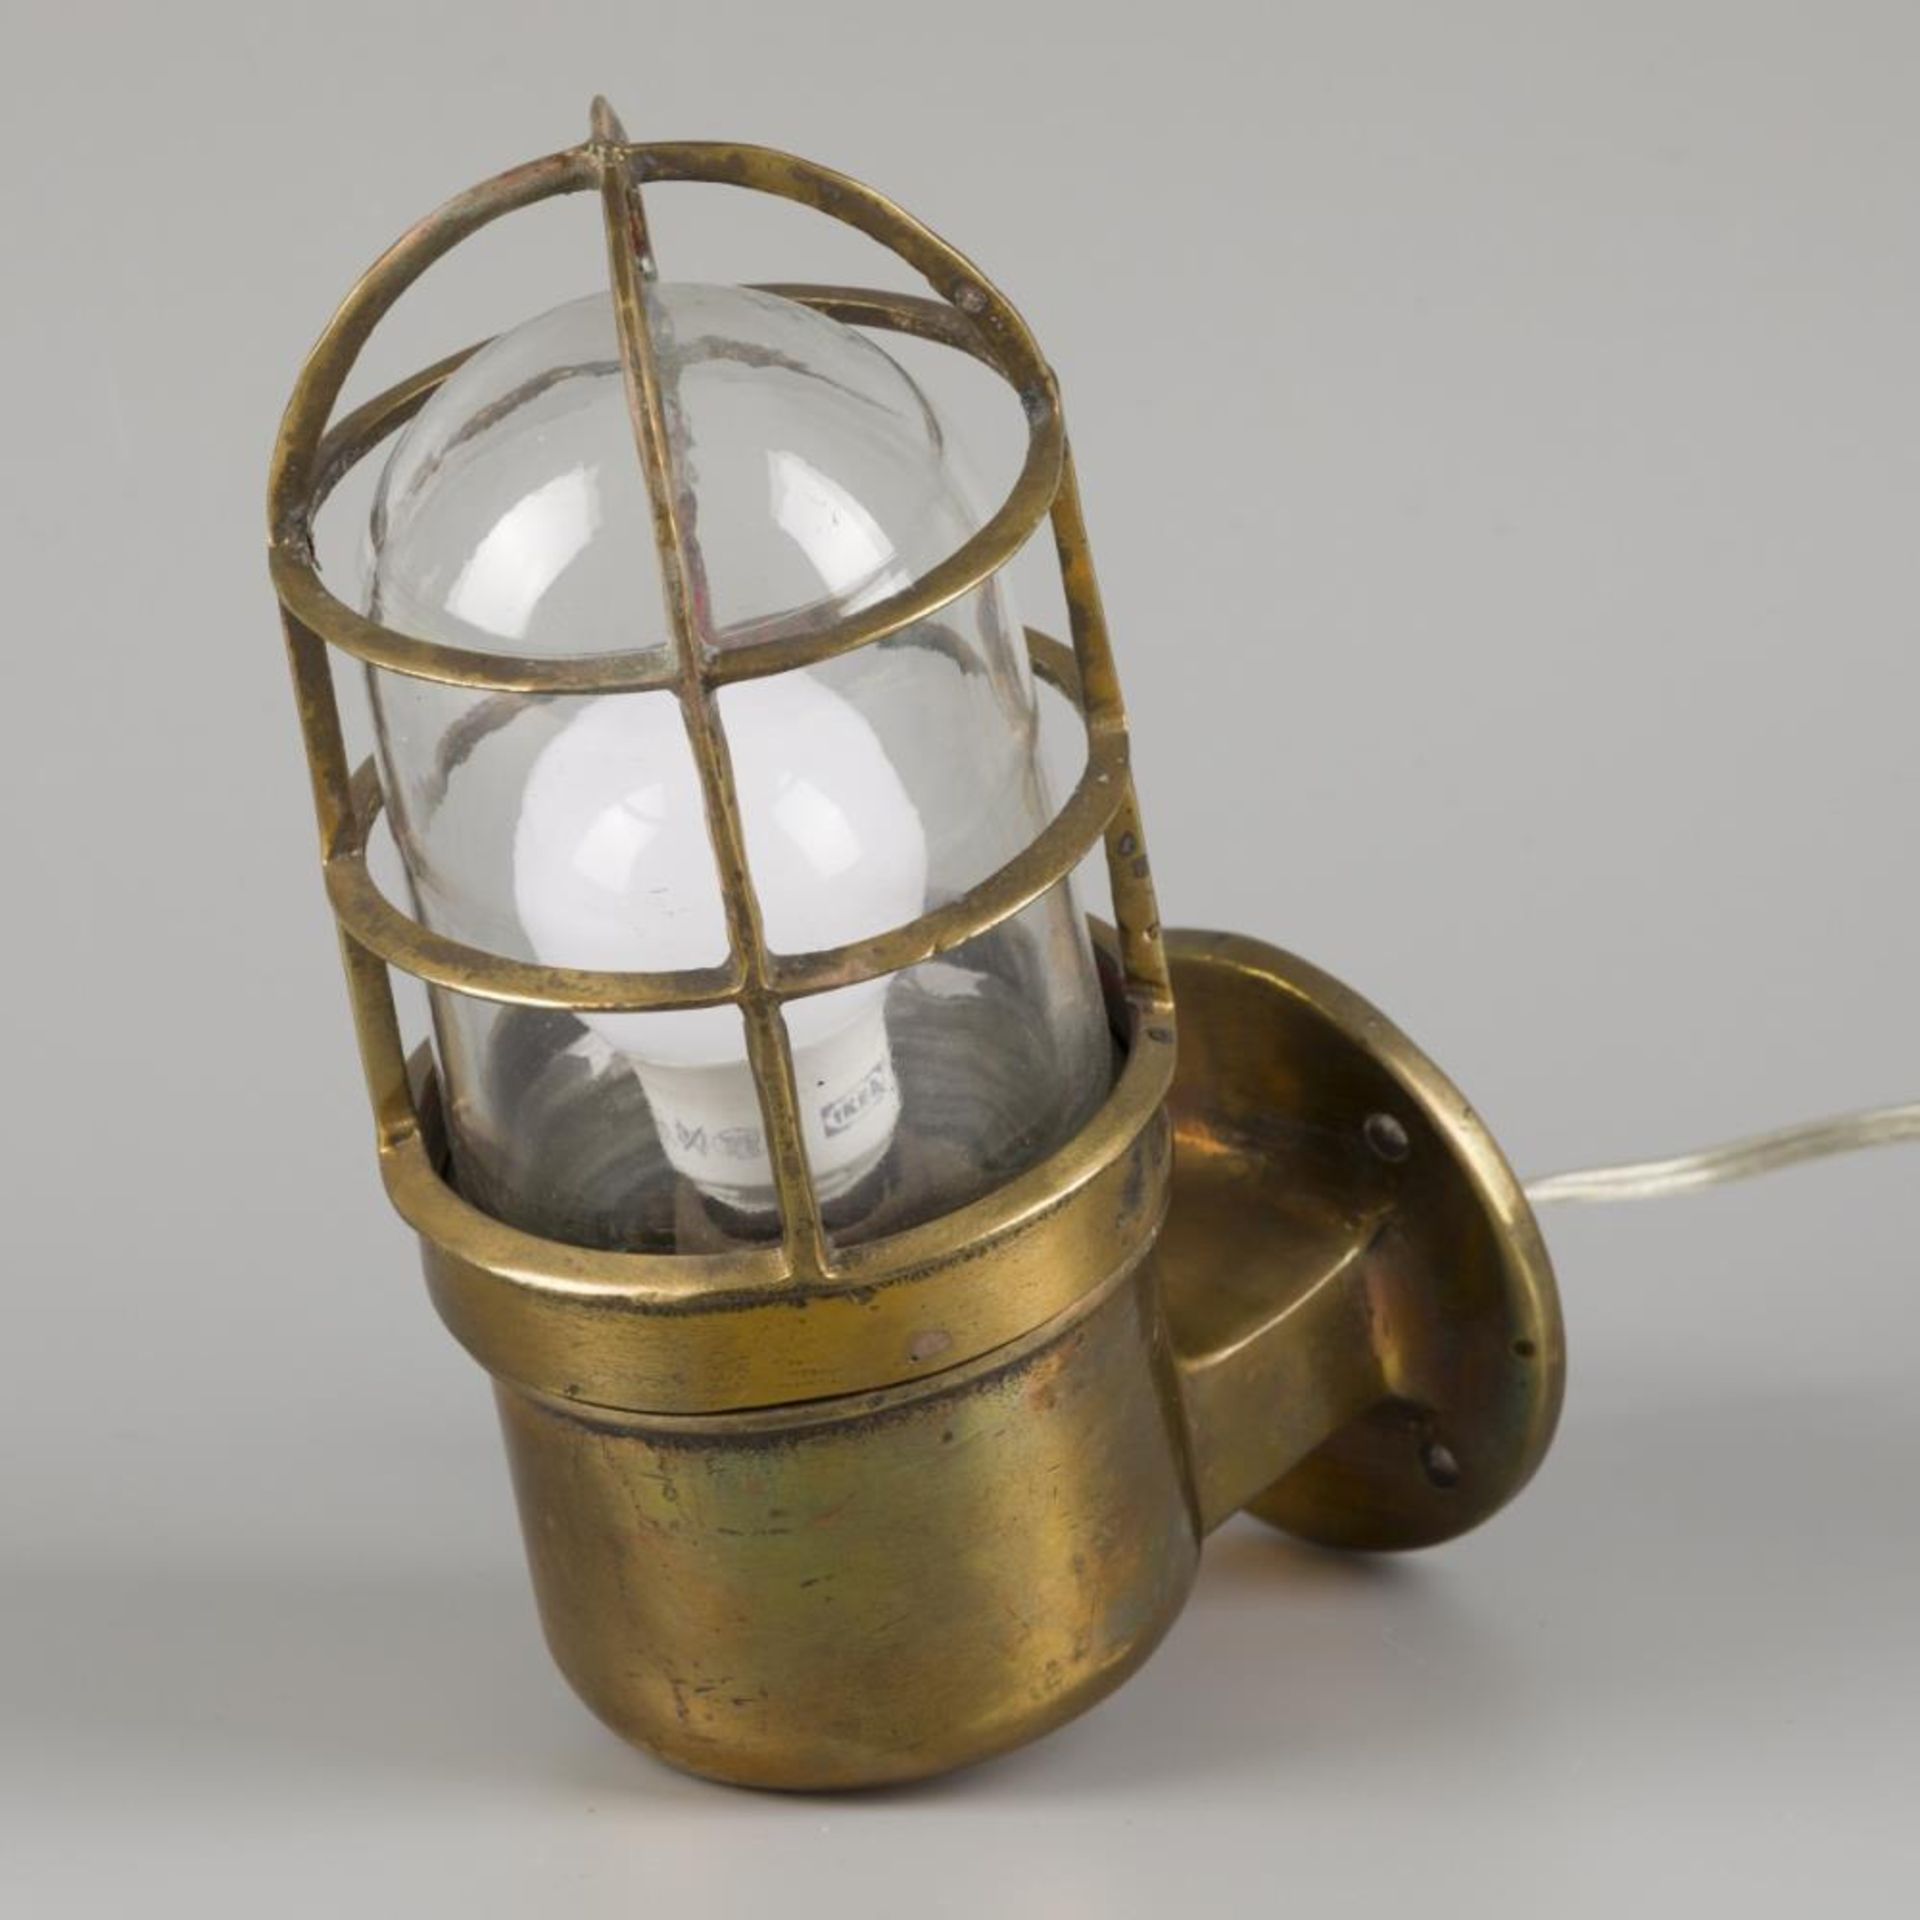 A brass wall-/ cage lamp, Asia(?), 20th century.